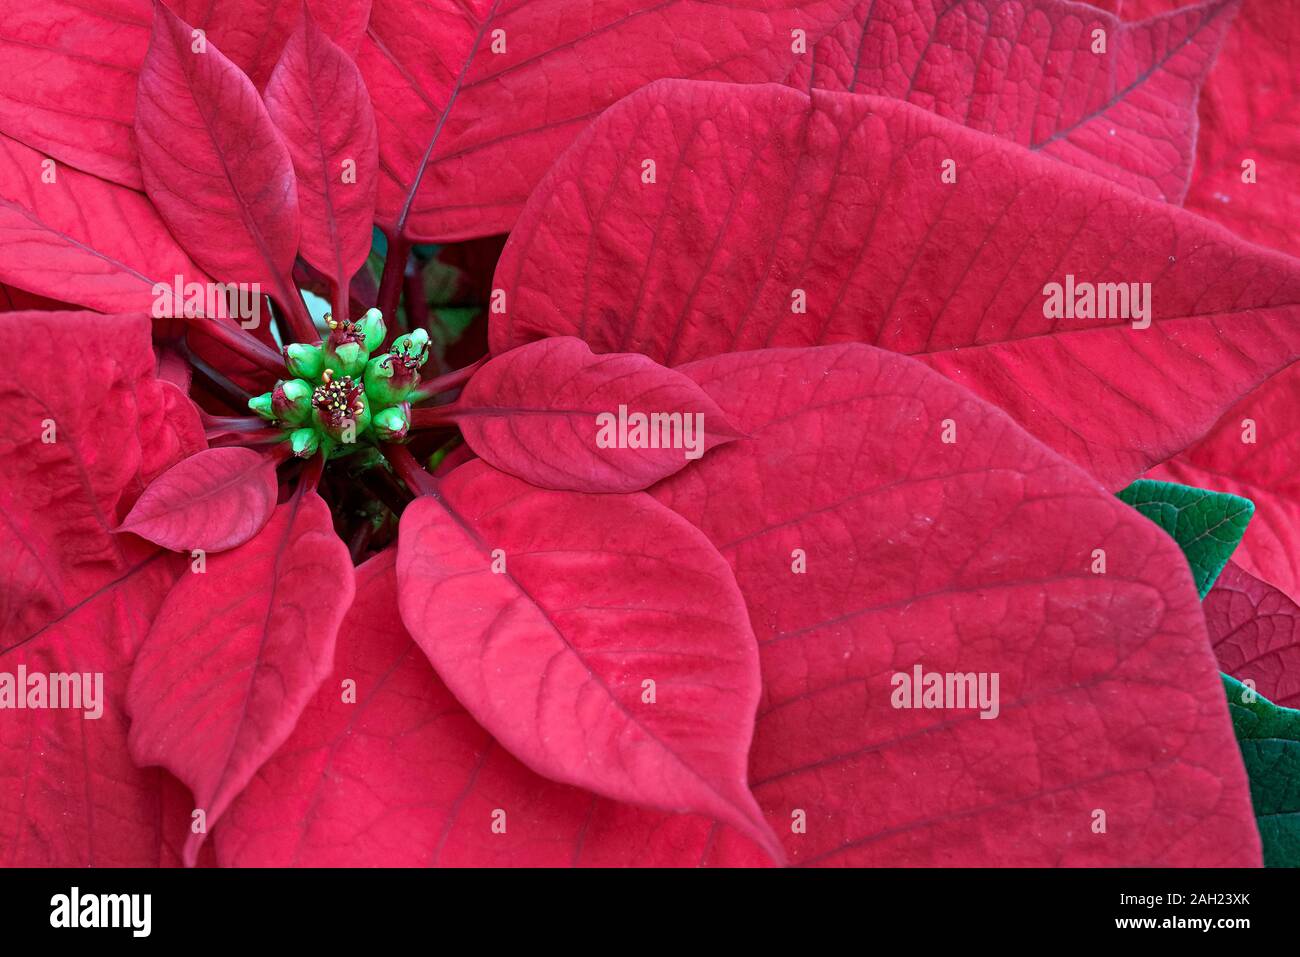 Poinsettia plant bloom close-up of pink red single flower  bract, centre towards left and leaves to the  right with plant petals filling area viewed from above Stock Photo